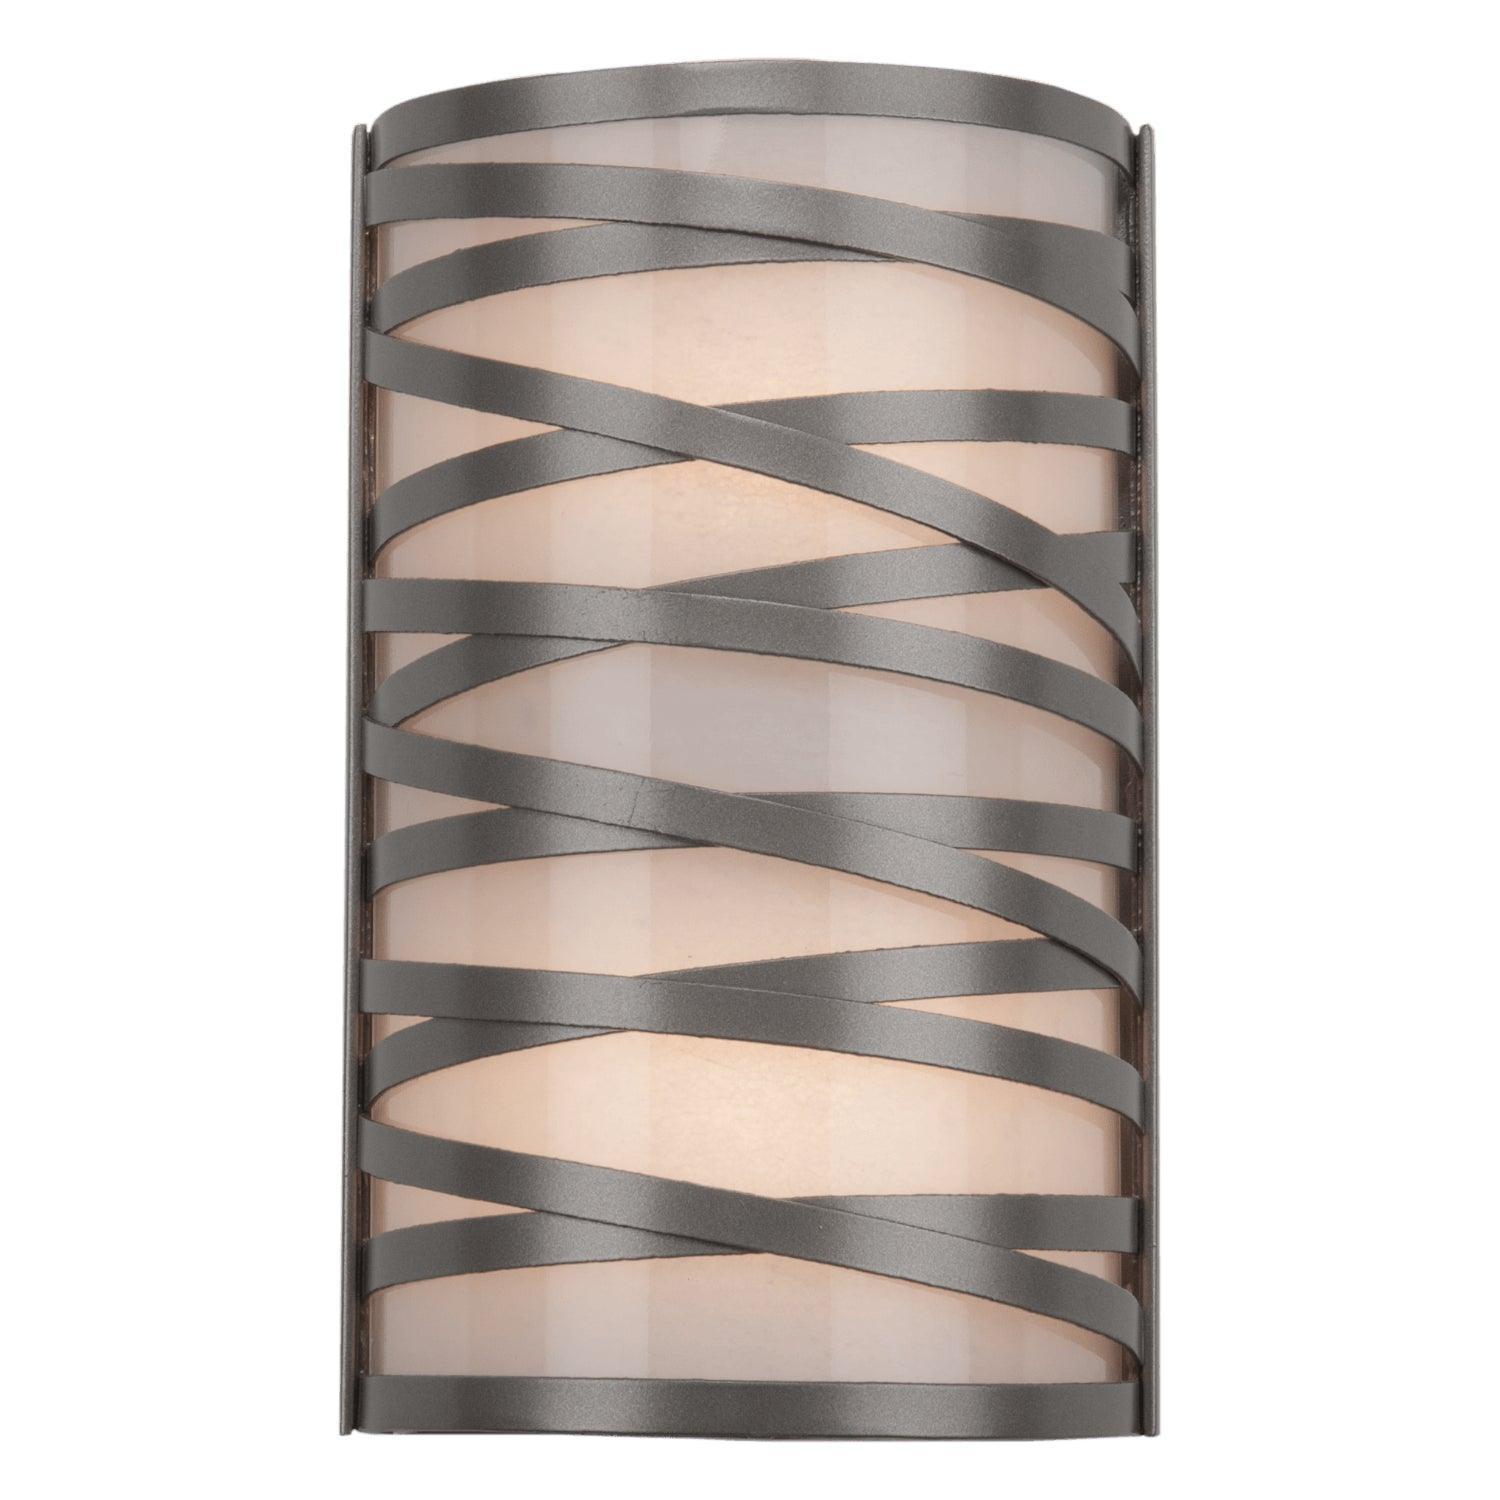 Hammerton Studio - Tempest Cover Sconce, -inch - CSB0013-12-BS-F-E1 | Montreal Lighting & Hardware